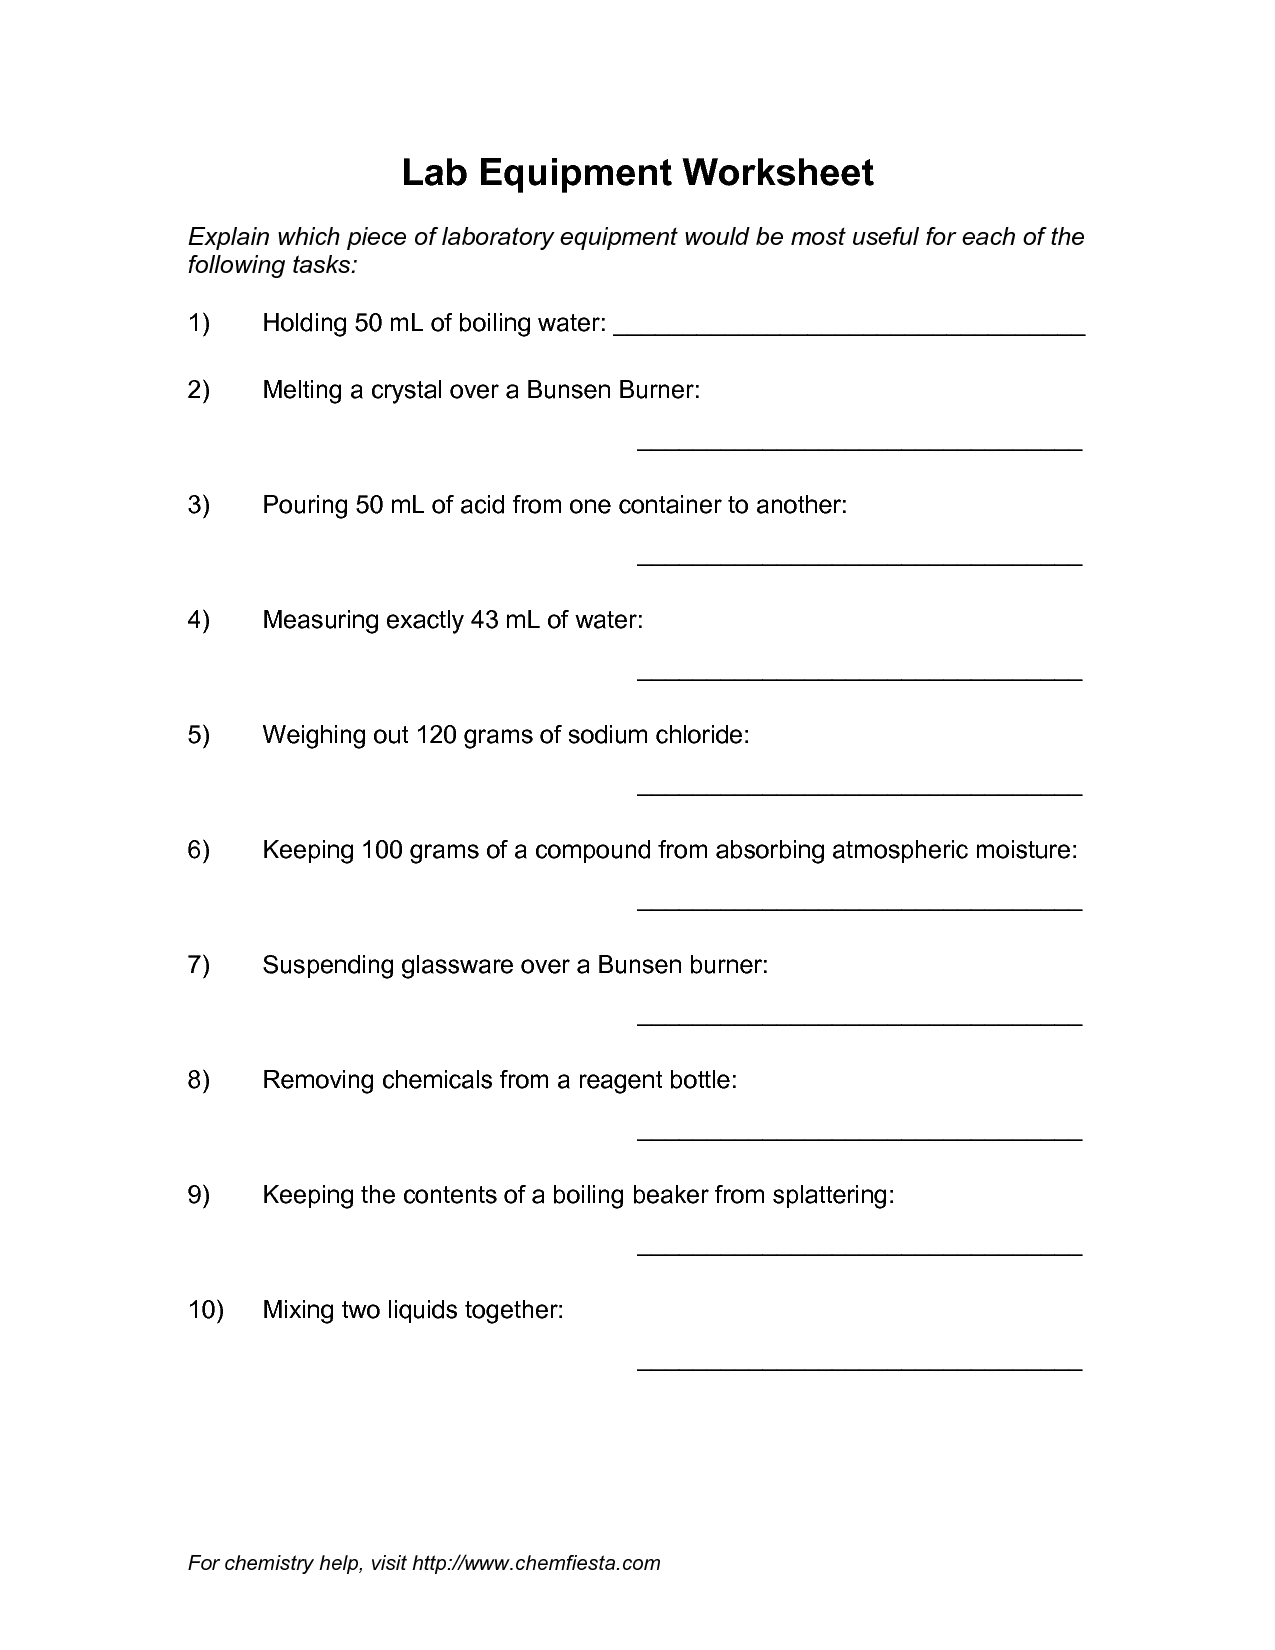 science-lab-equipment-worksheet-answers